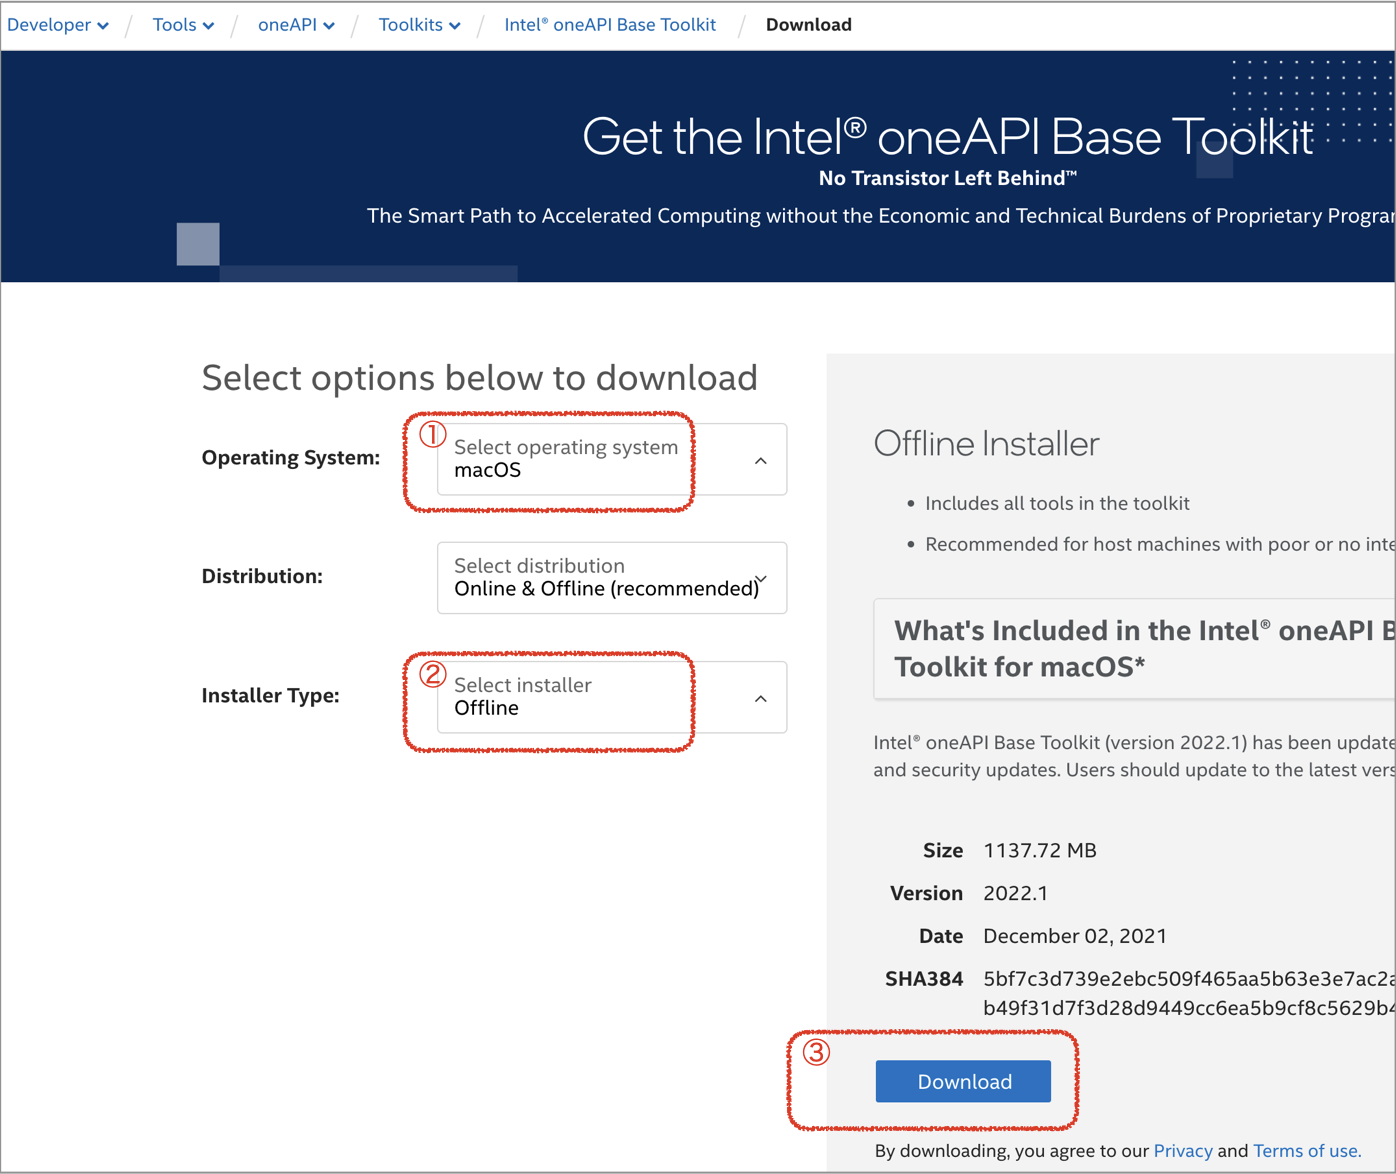 Get the Intel® oneAPI Base Toolkit